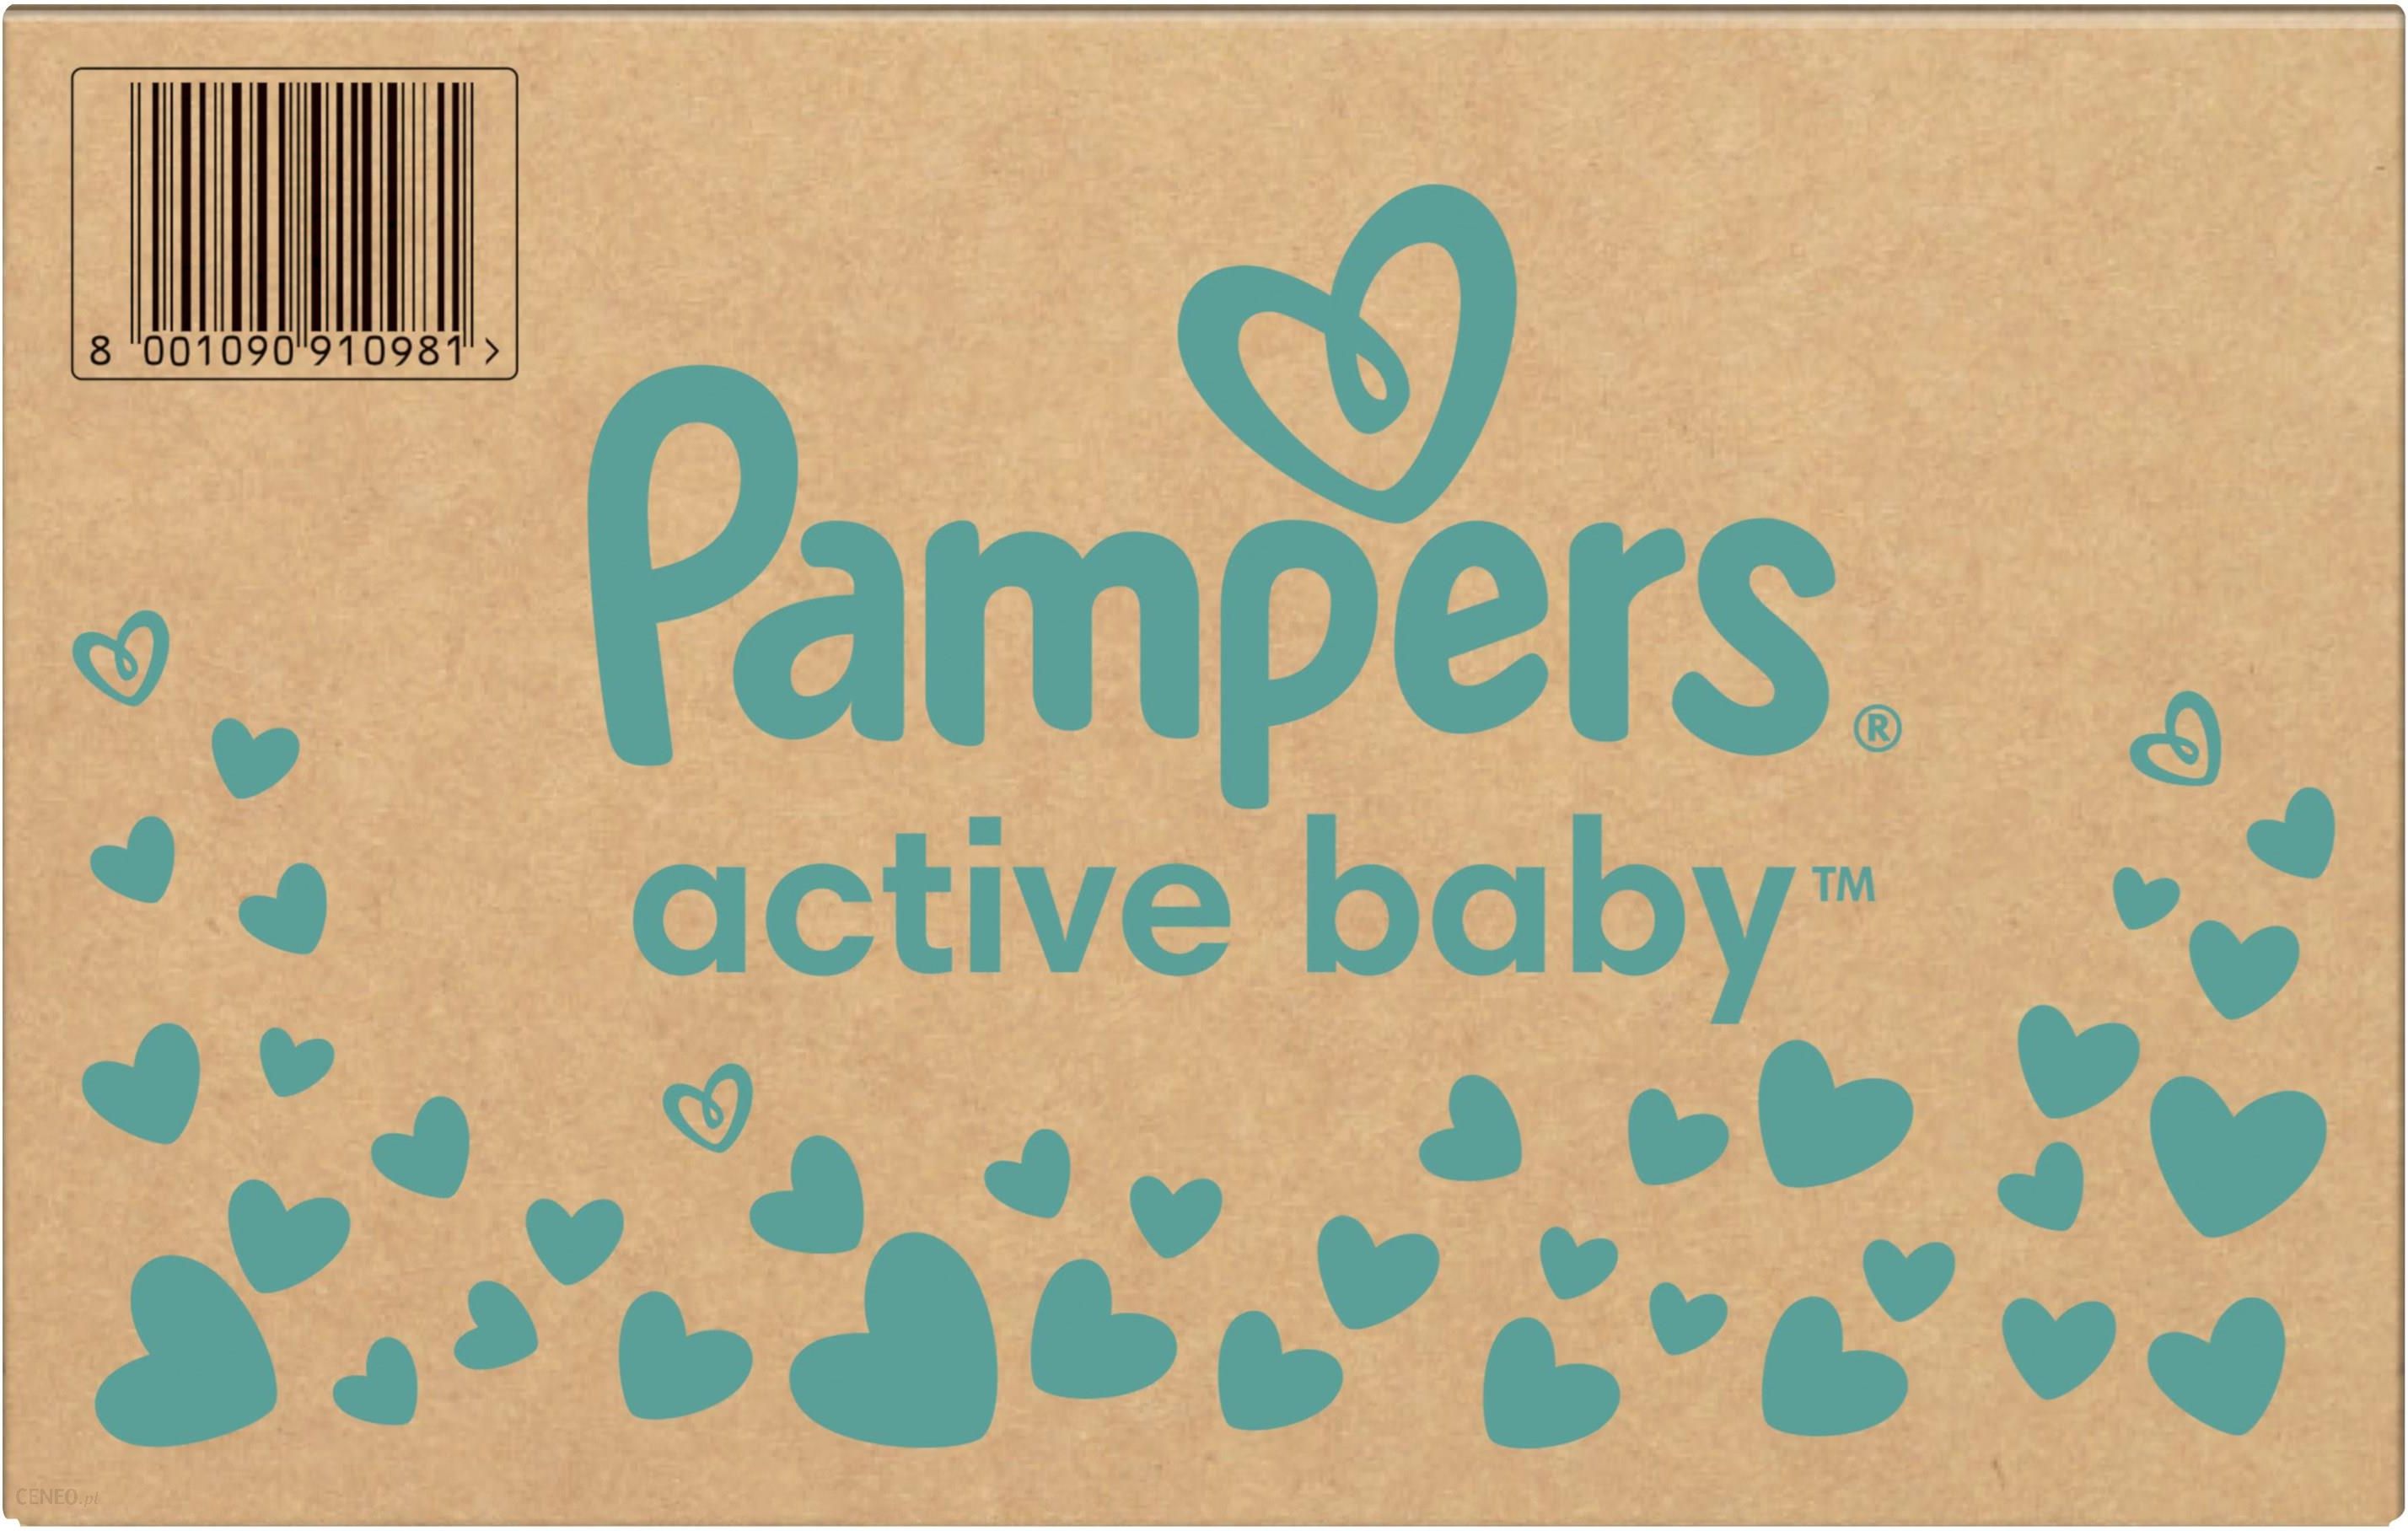 pampers 5 150 ceneo